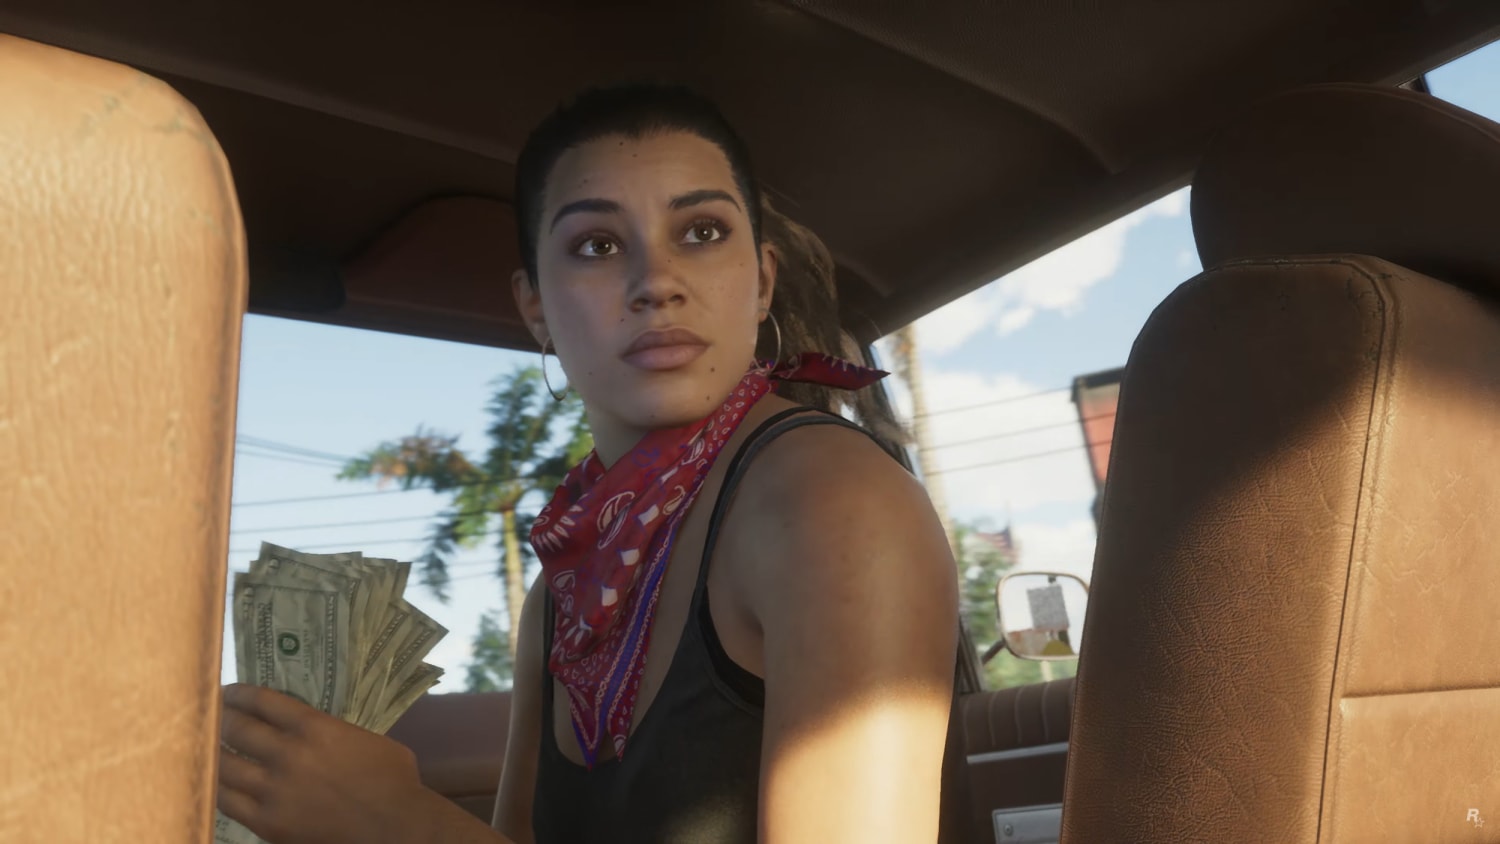 The Grand Theft Auto 6 trailer is here just in time for the video game industry